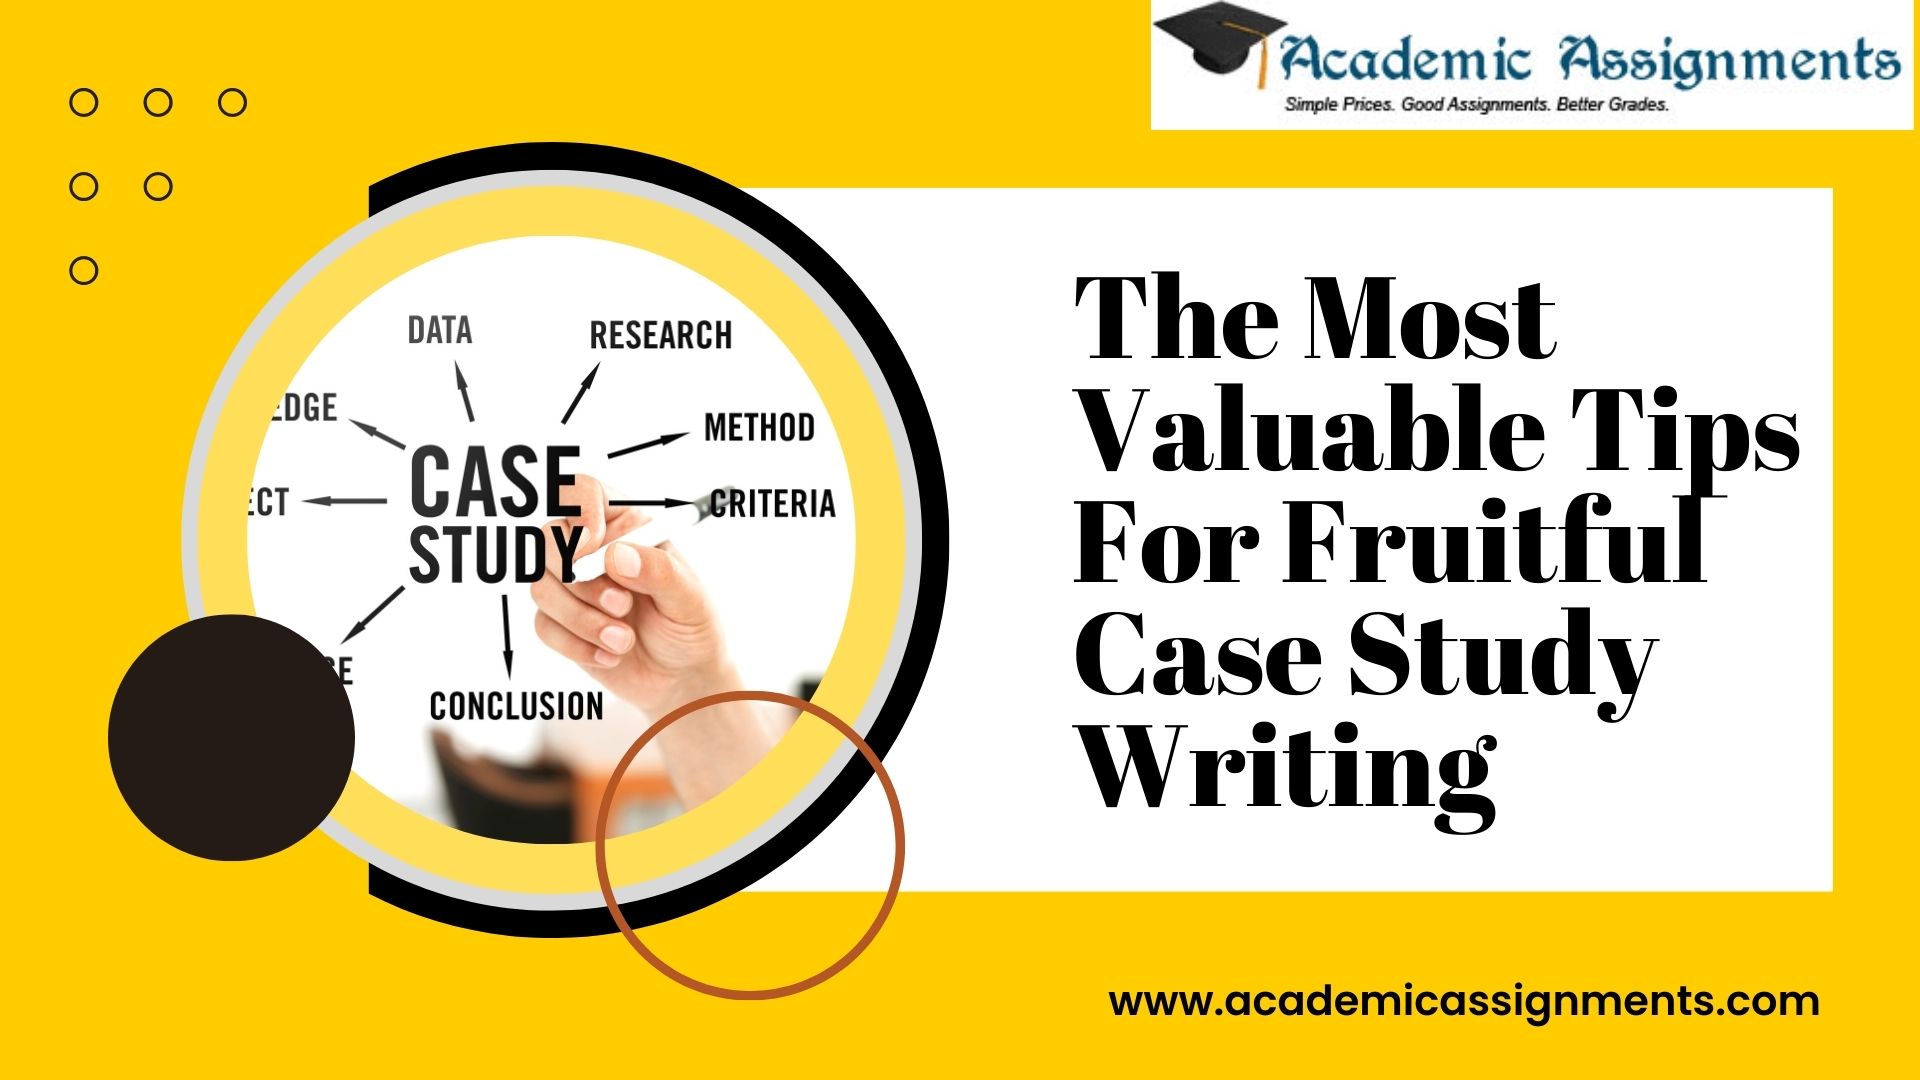 The Most Valuable Tips For Fruitful Case Study Writing